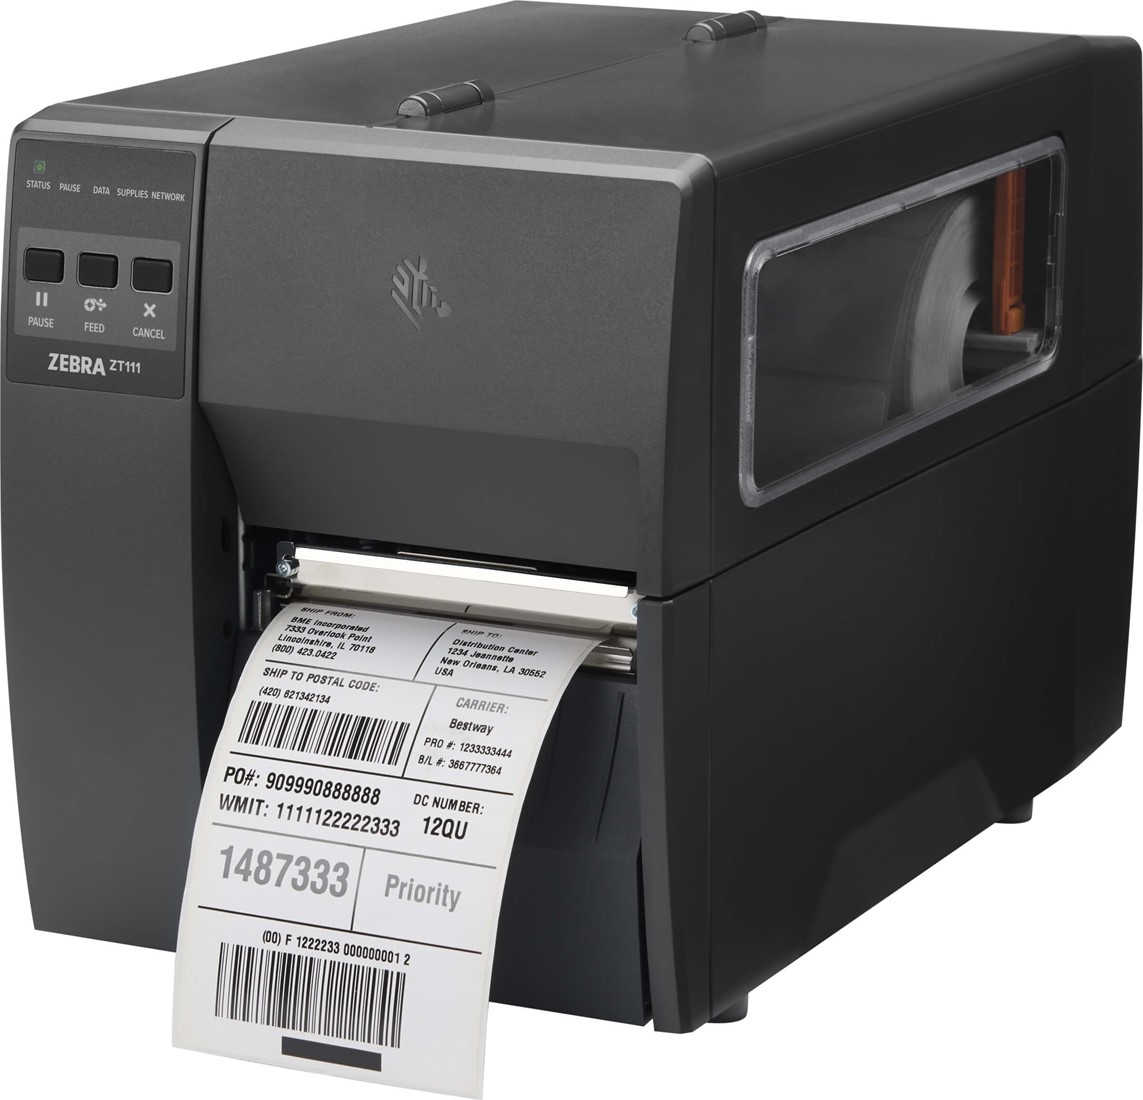 Zebra Zt111 Label Printer Affordable Printing Solution With High Quality Results 5409